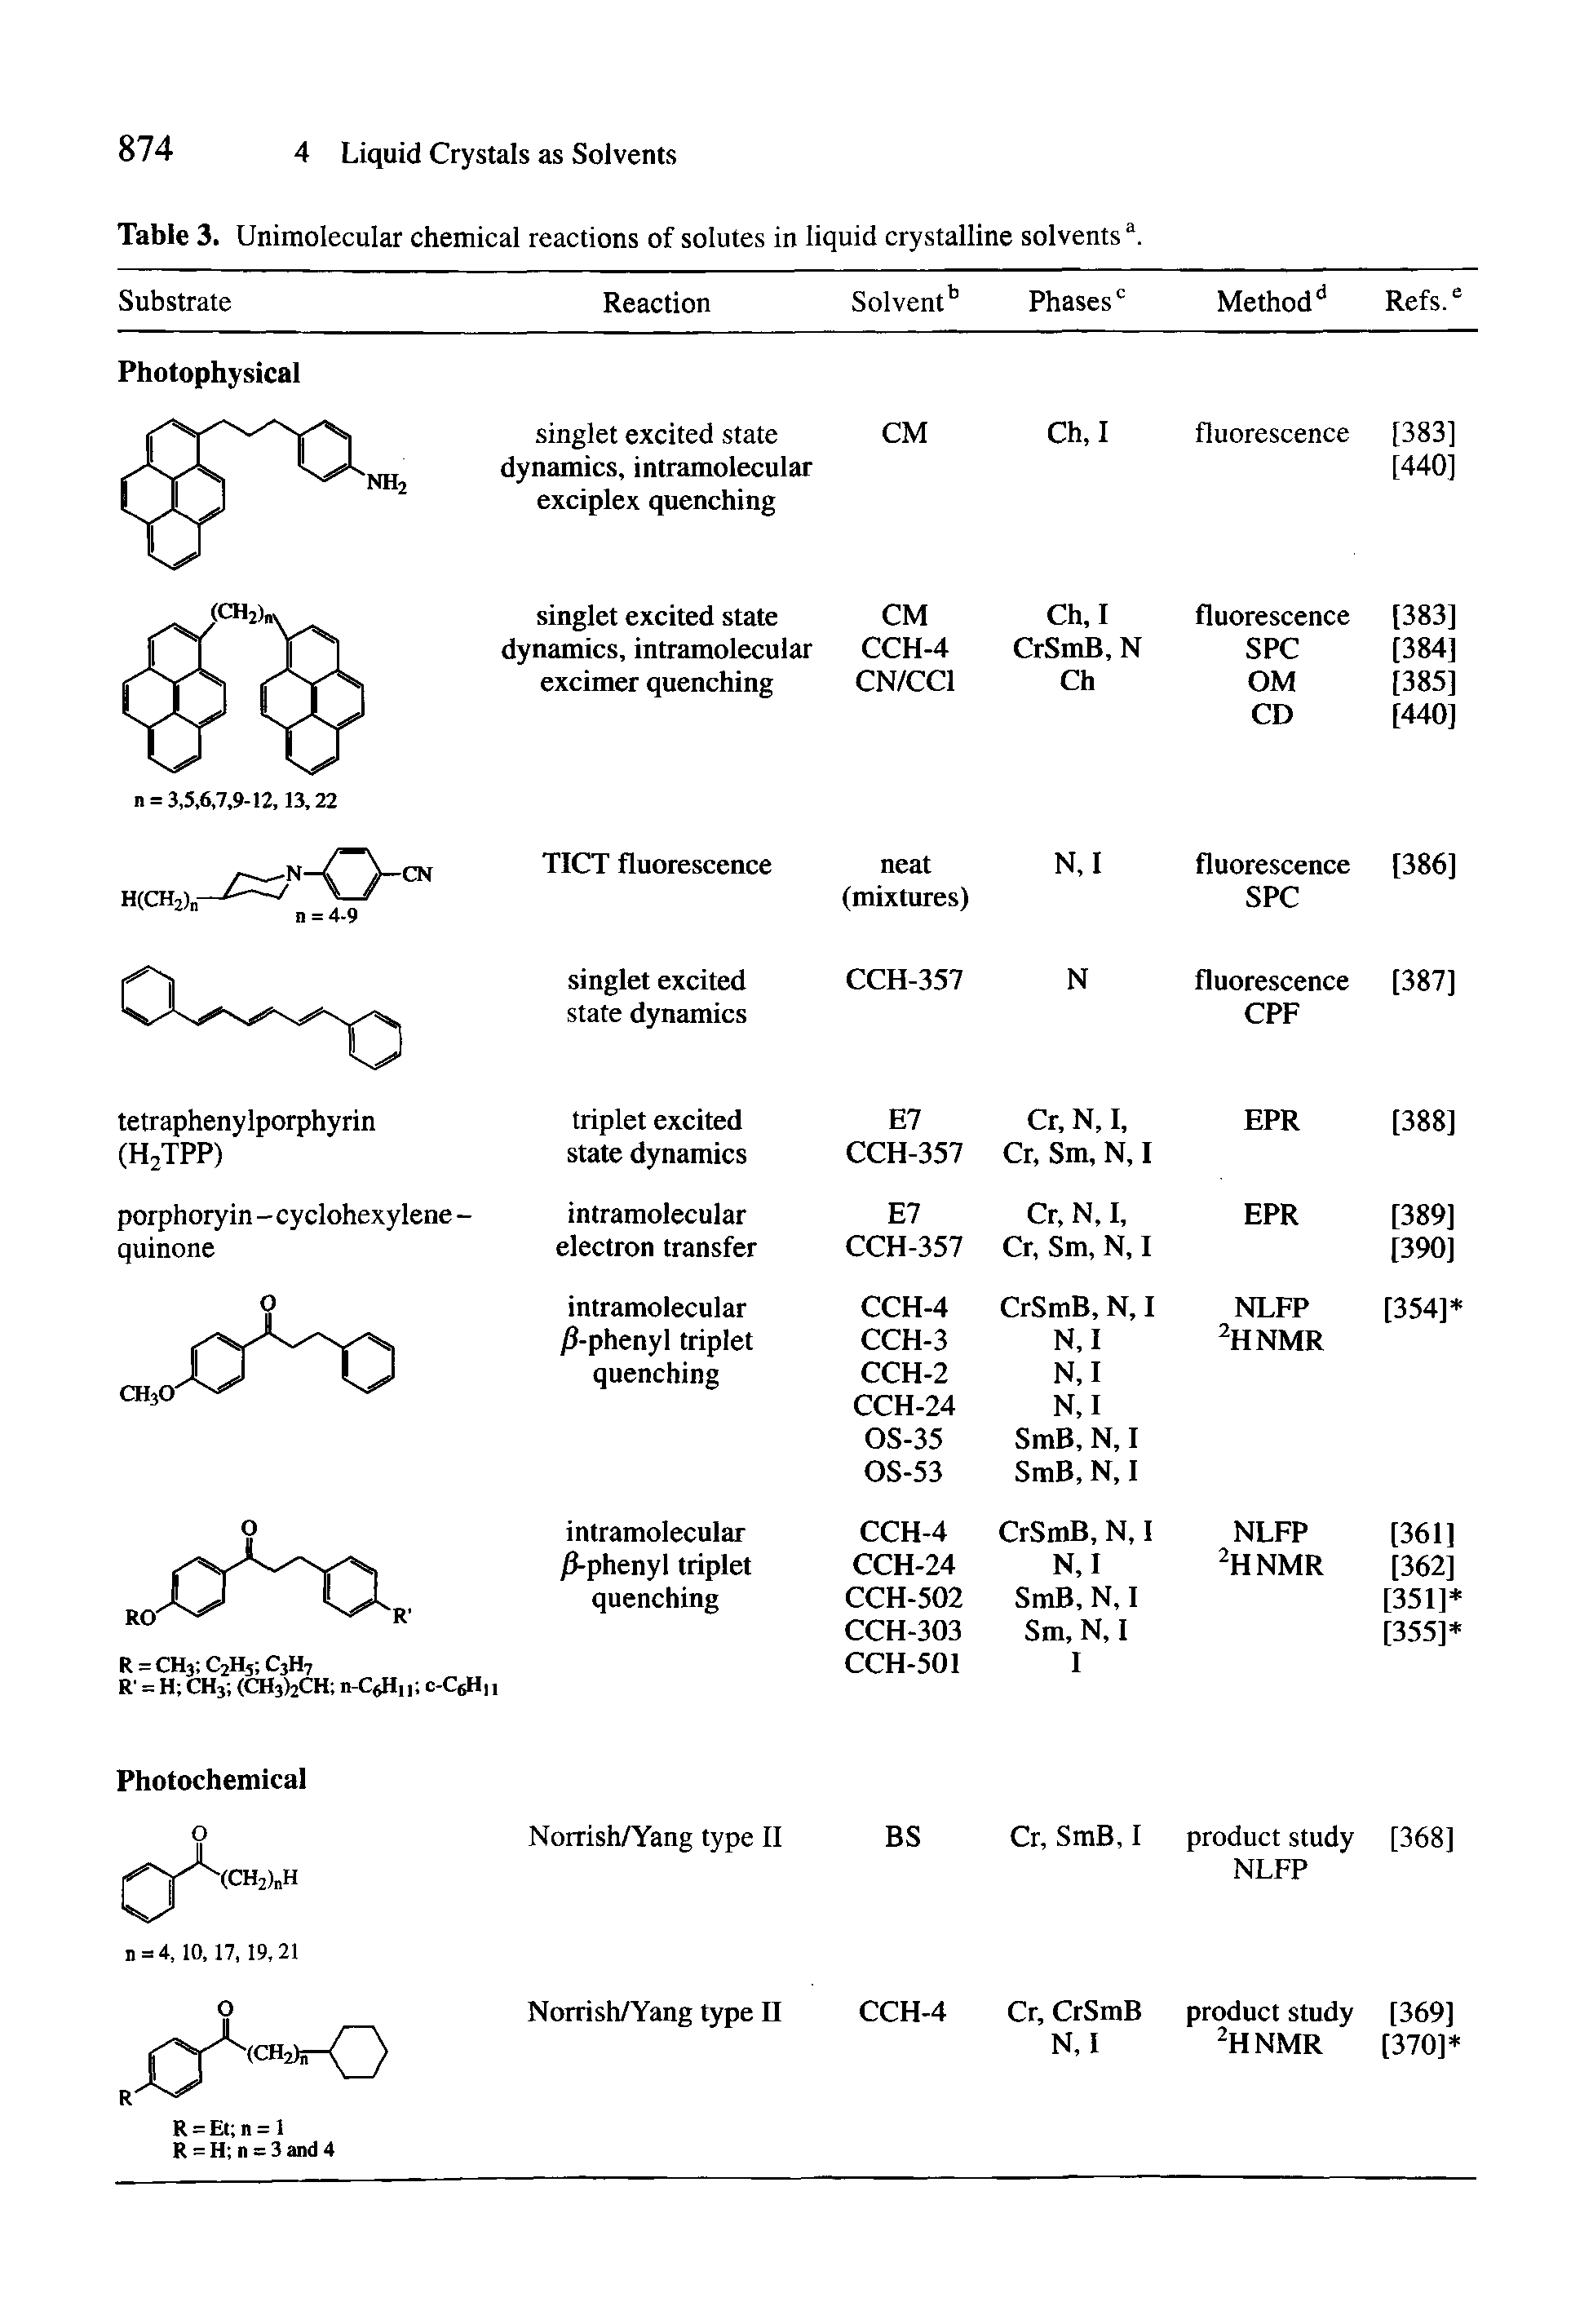 Table 3. Unimolecular chemical reactions of solutes in liquid crystalline solvents...